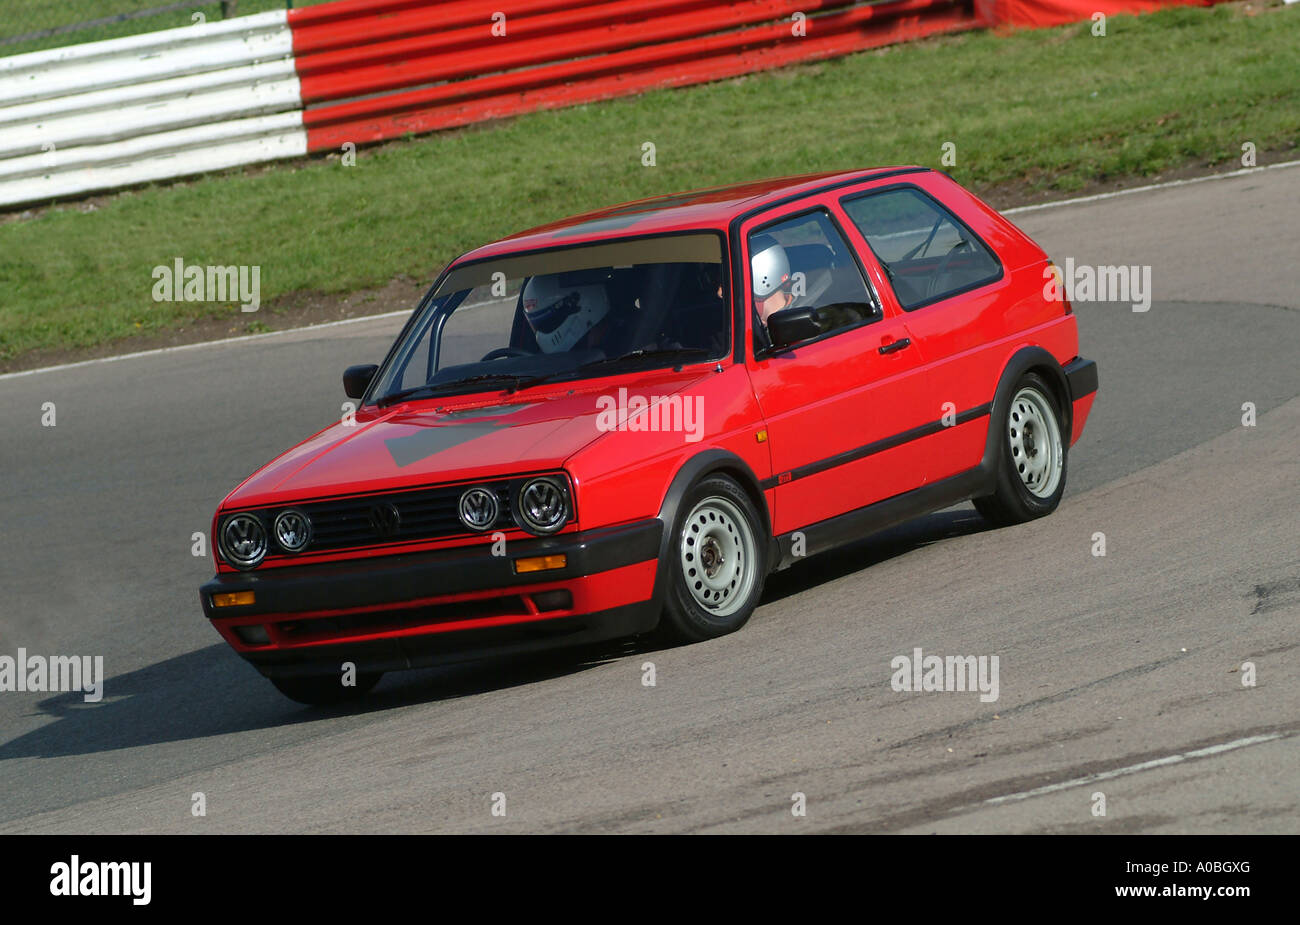 Vw golf mk2 hi-res stock photography and images - Alamy